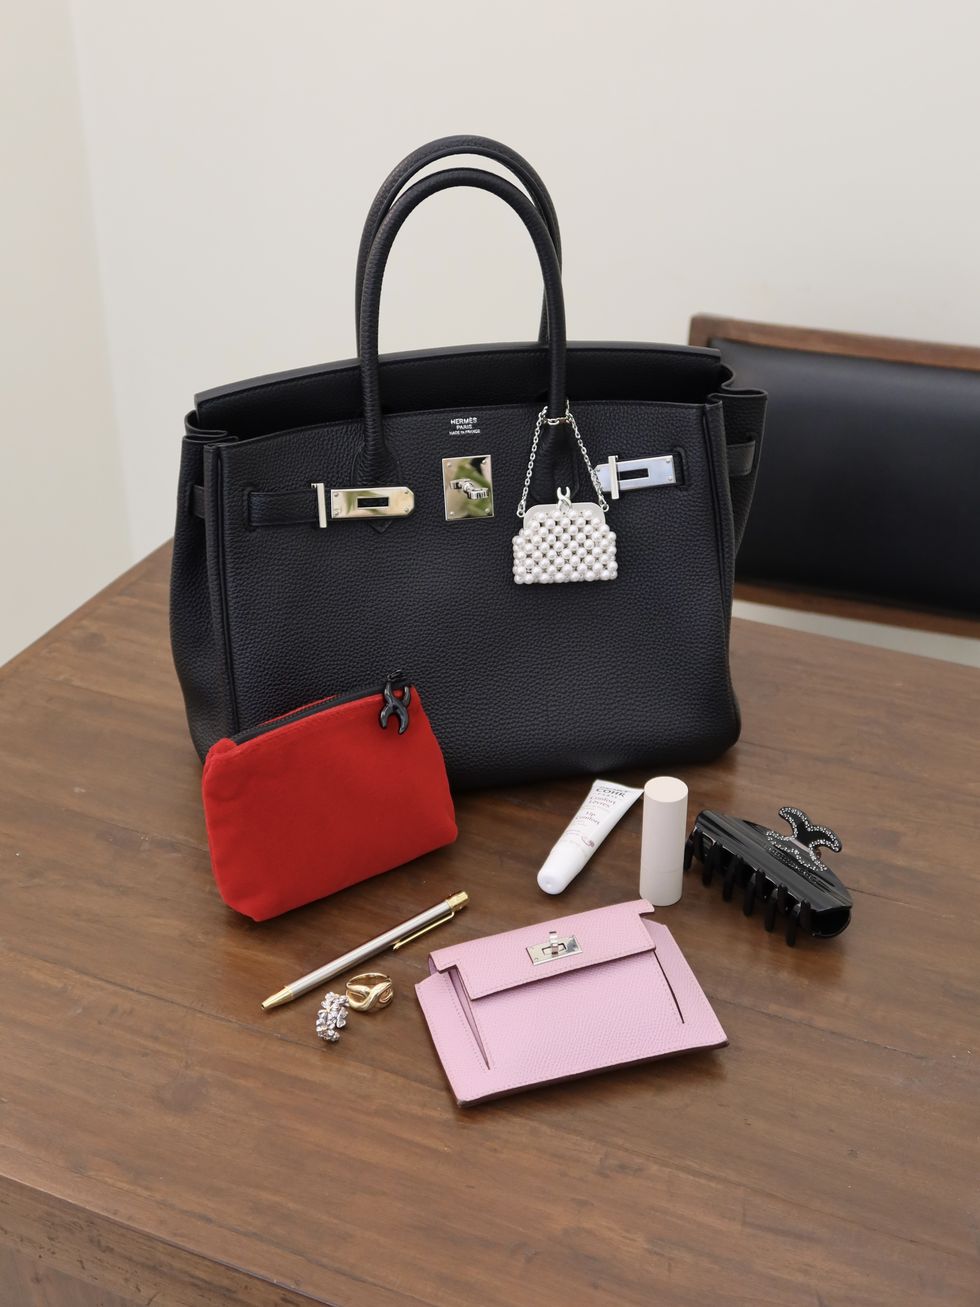 a purse and some keys on a table